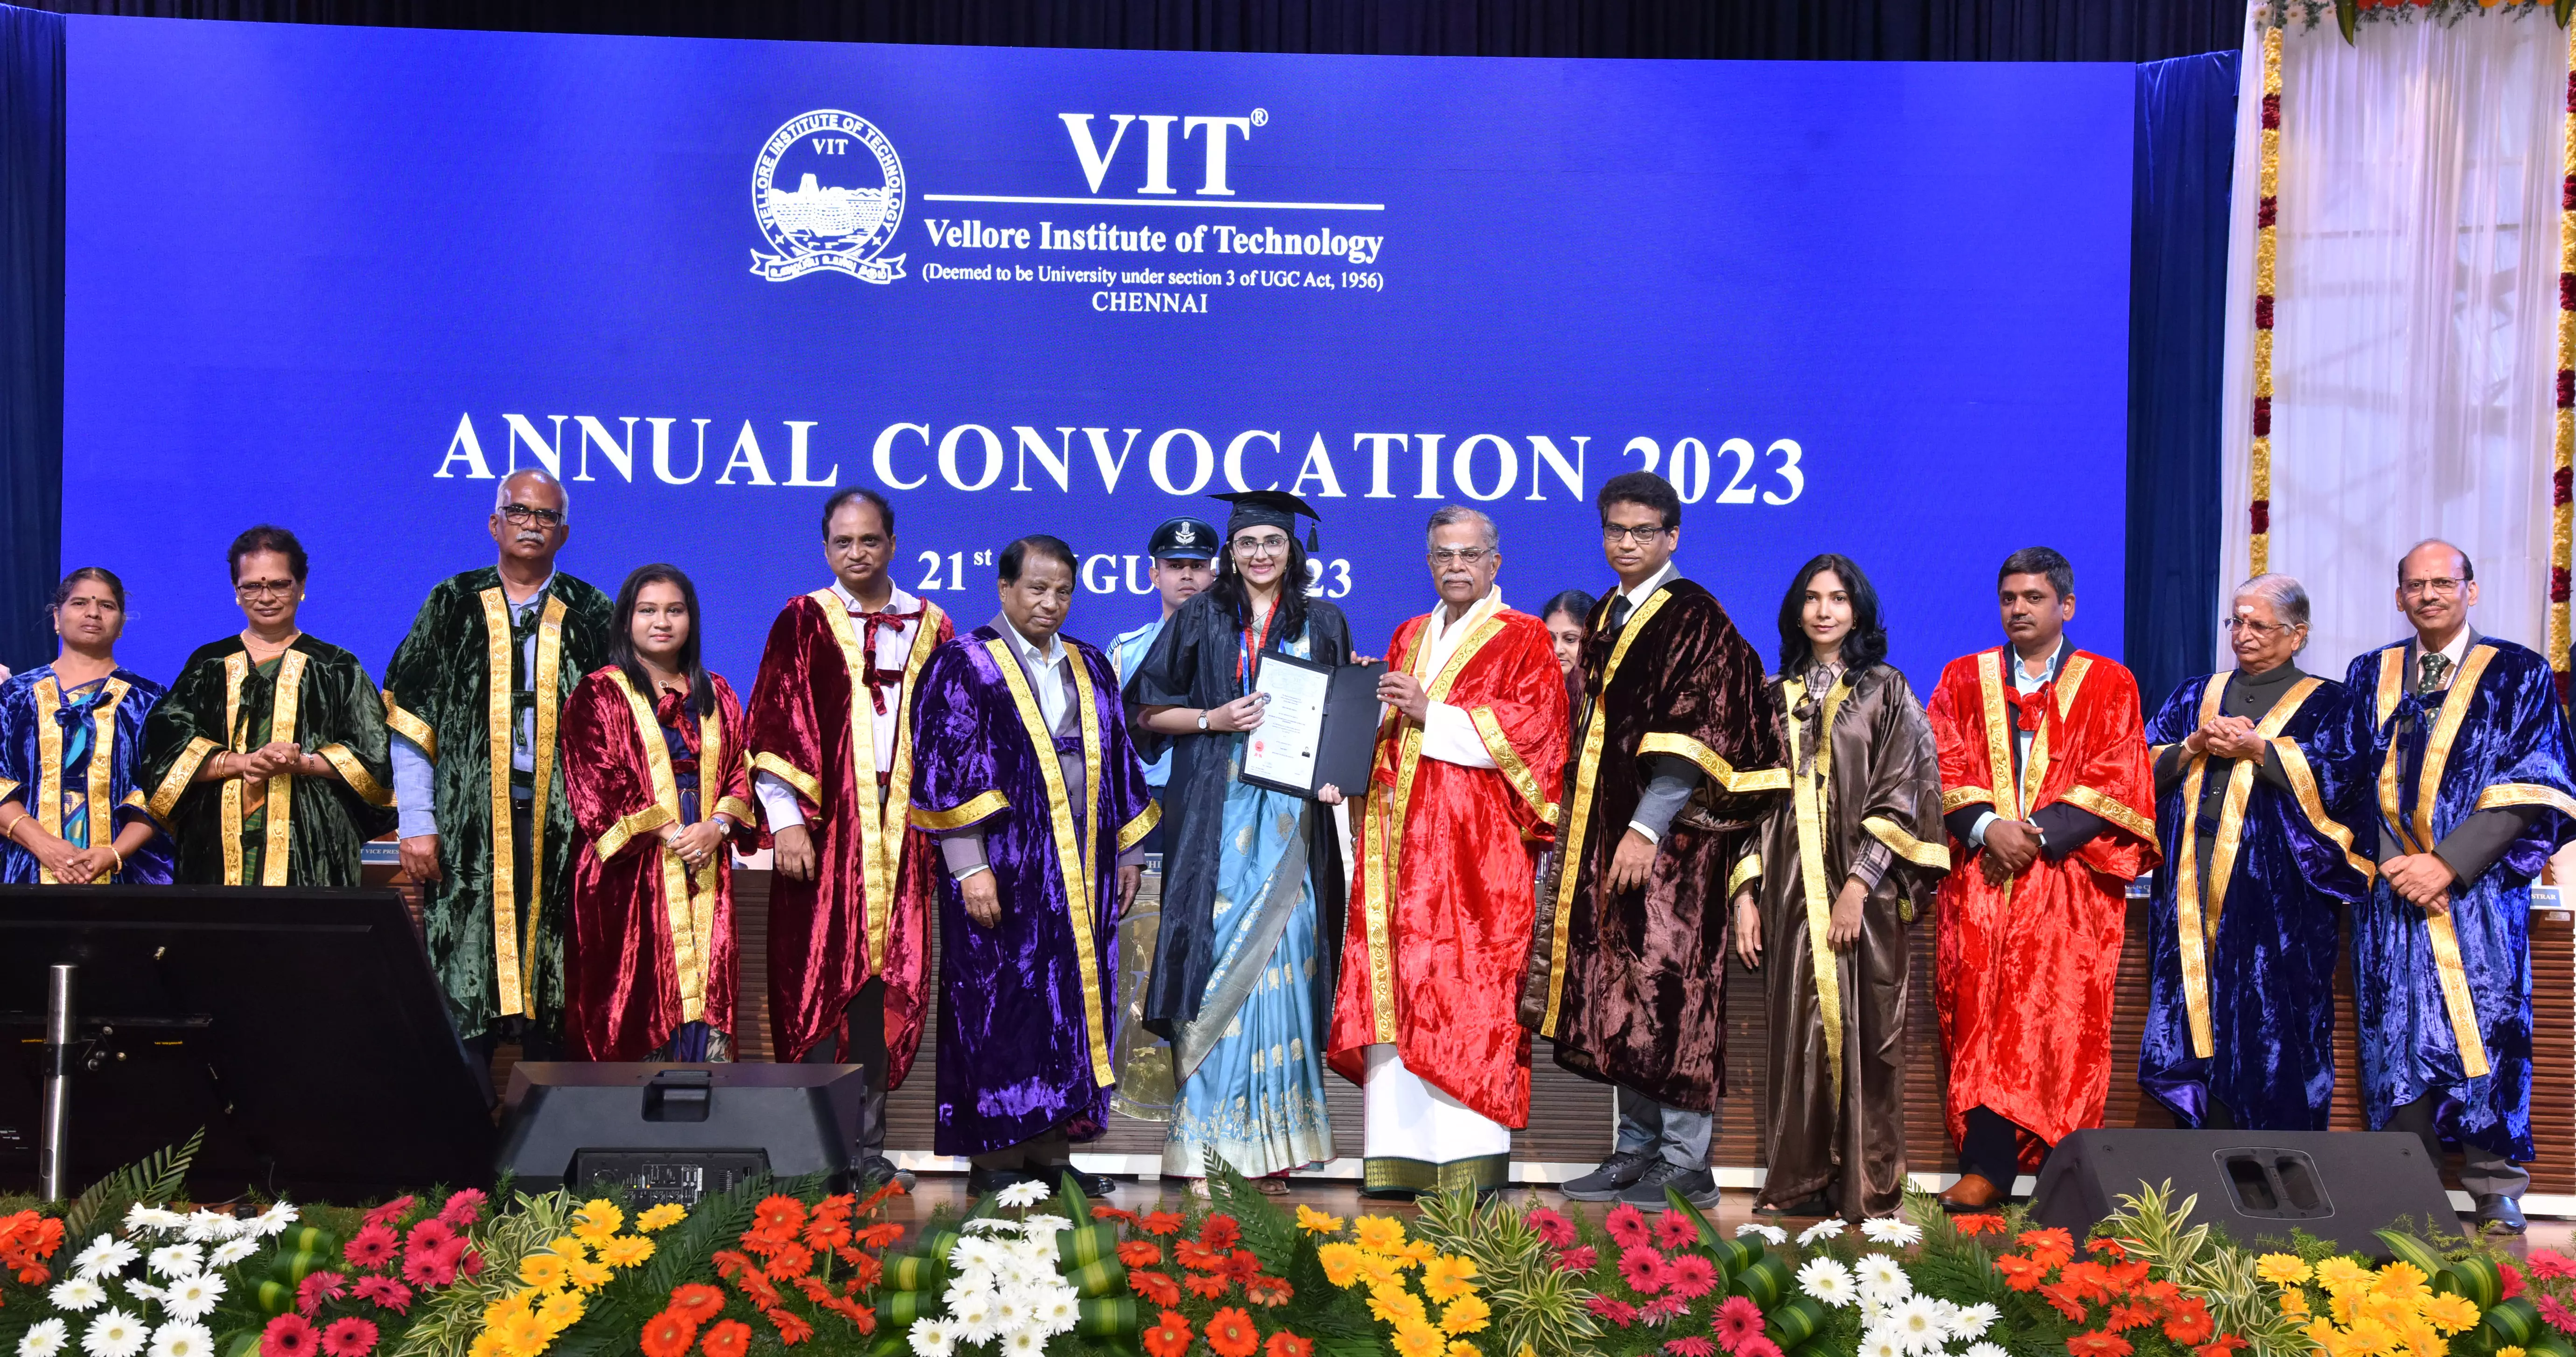 VIT Chennai: Convocation 2023 held, new buildings inaugurated